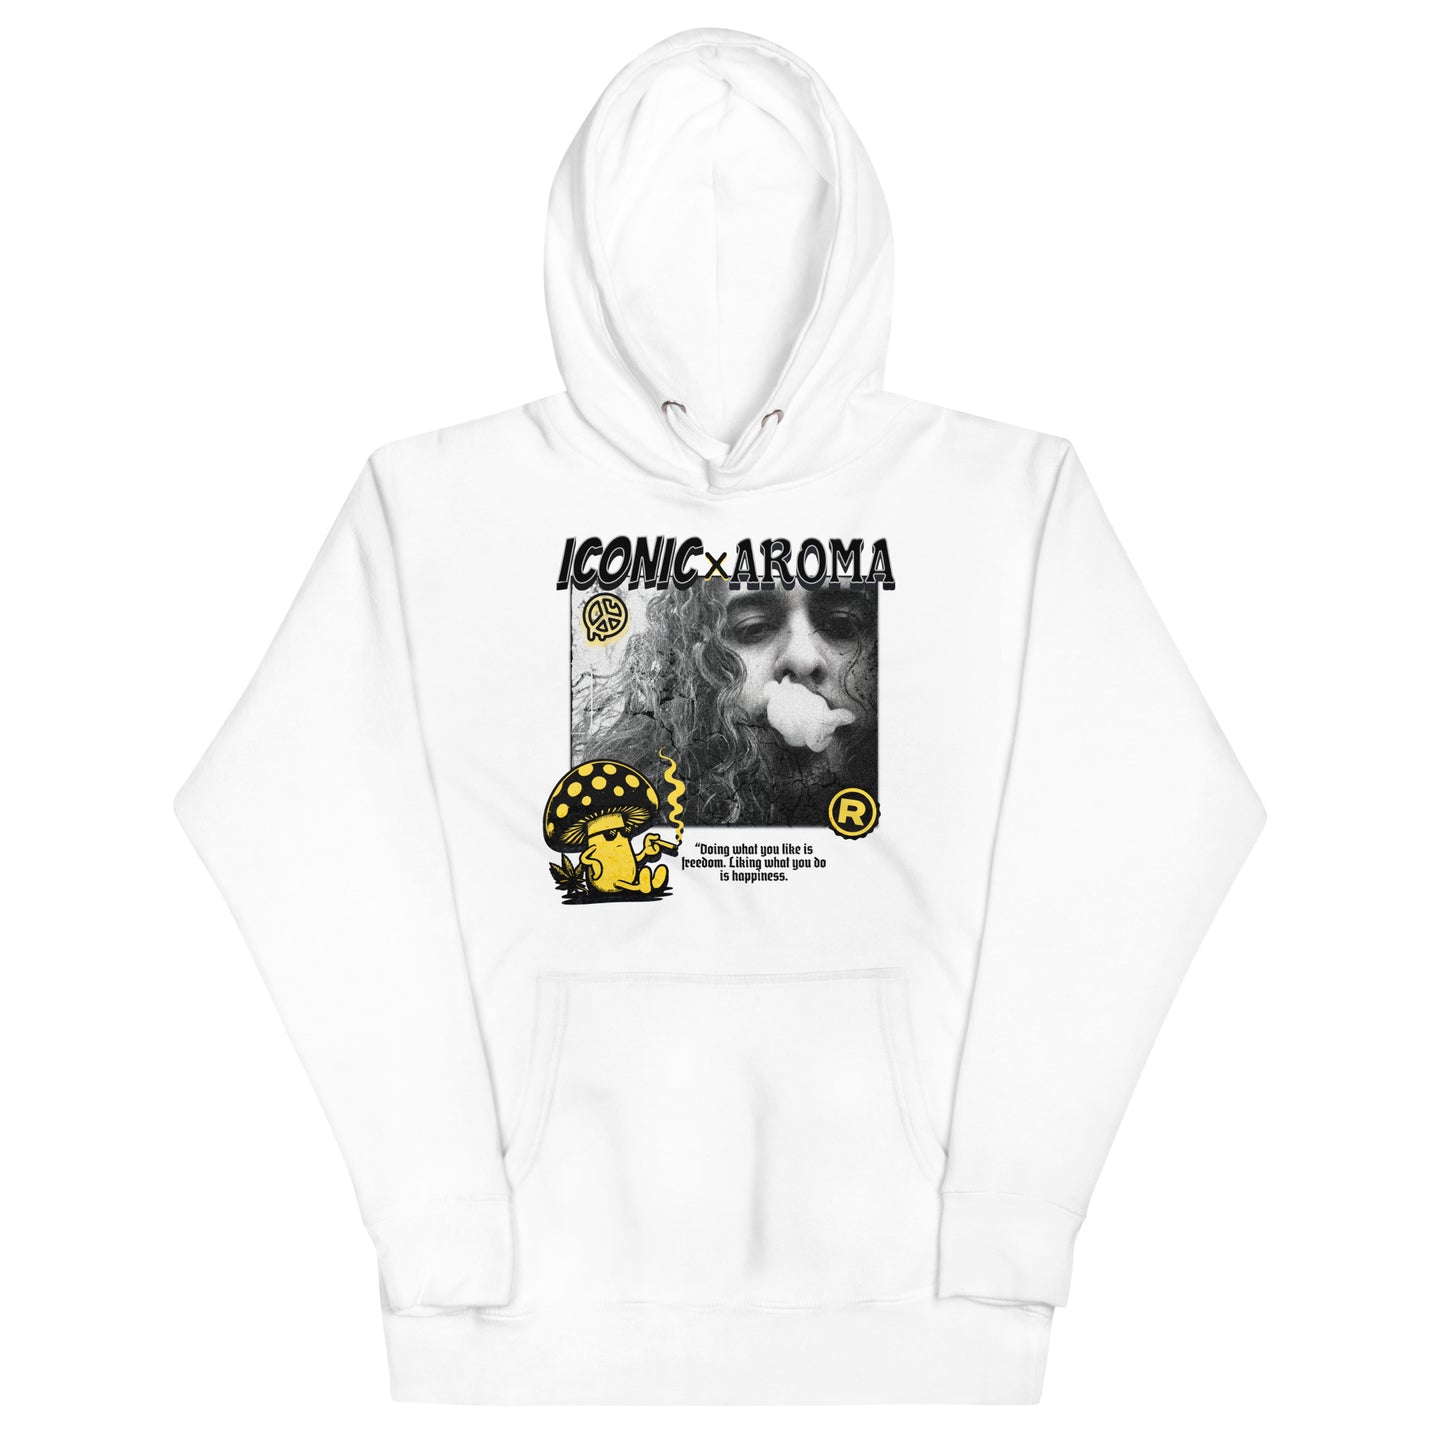 The Freedom and Happiness hoodie by Iconic Hustle x The Aroma